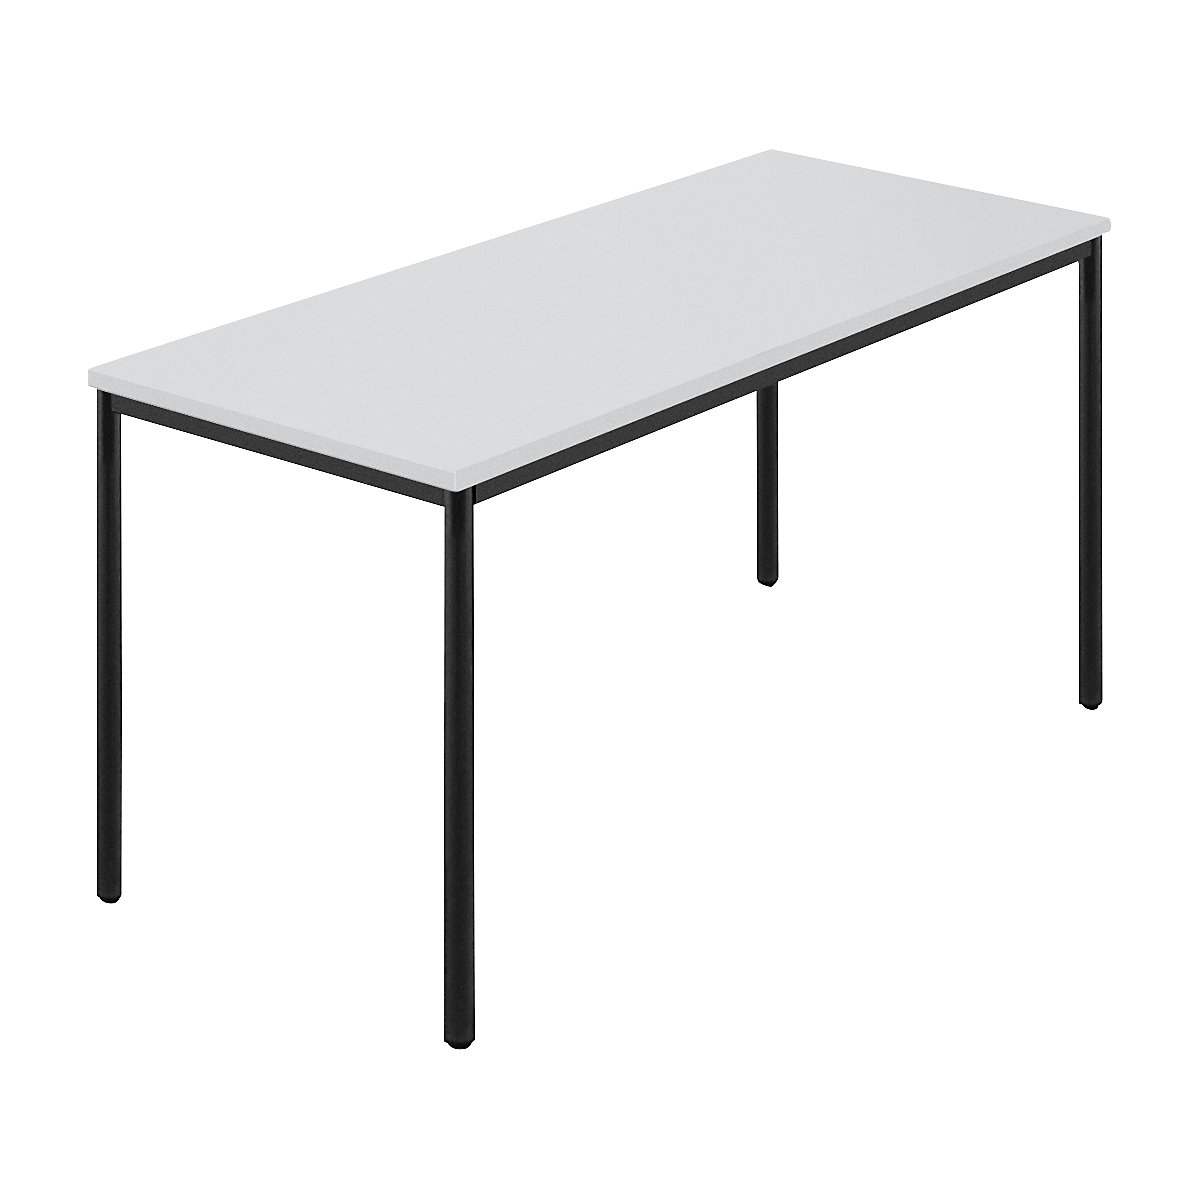 Rectangular table, coated round tubing, WxD 1400 x 700 mm, grey / anthracite-6